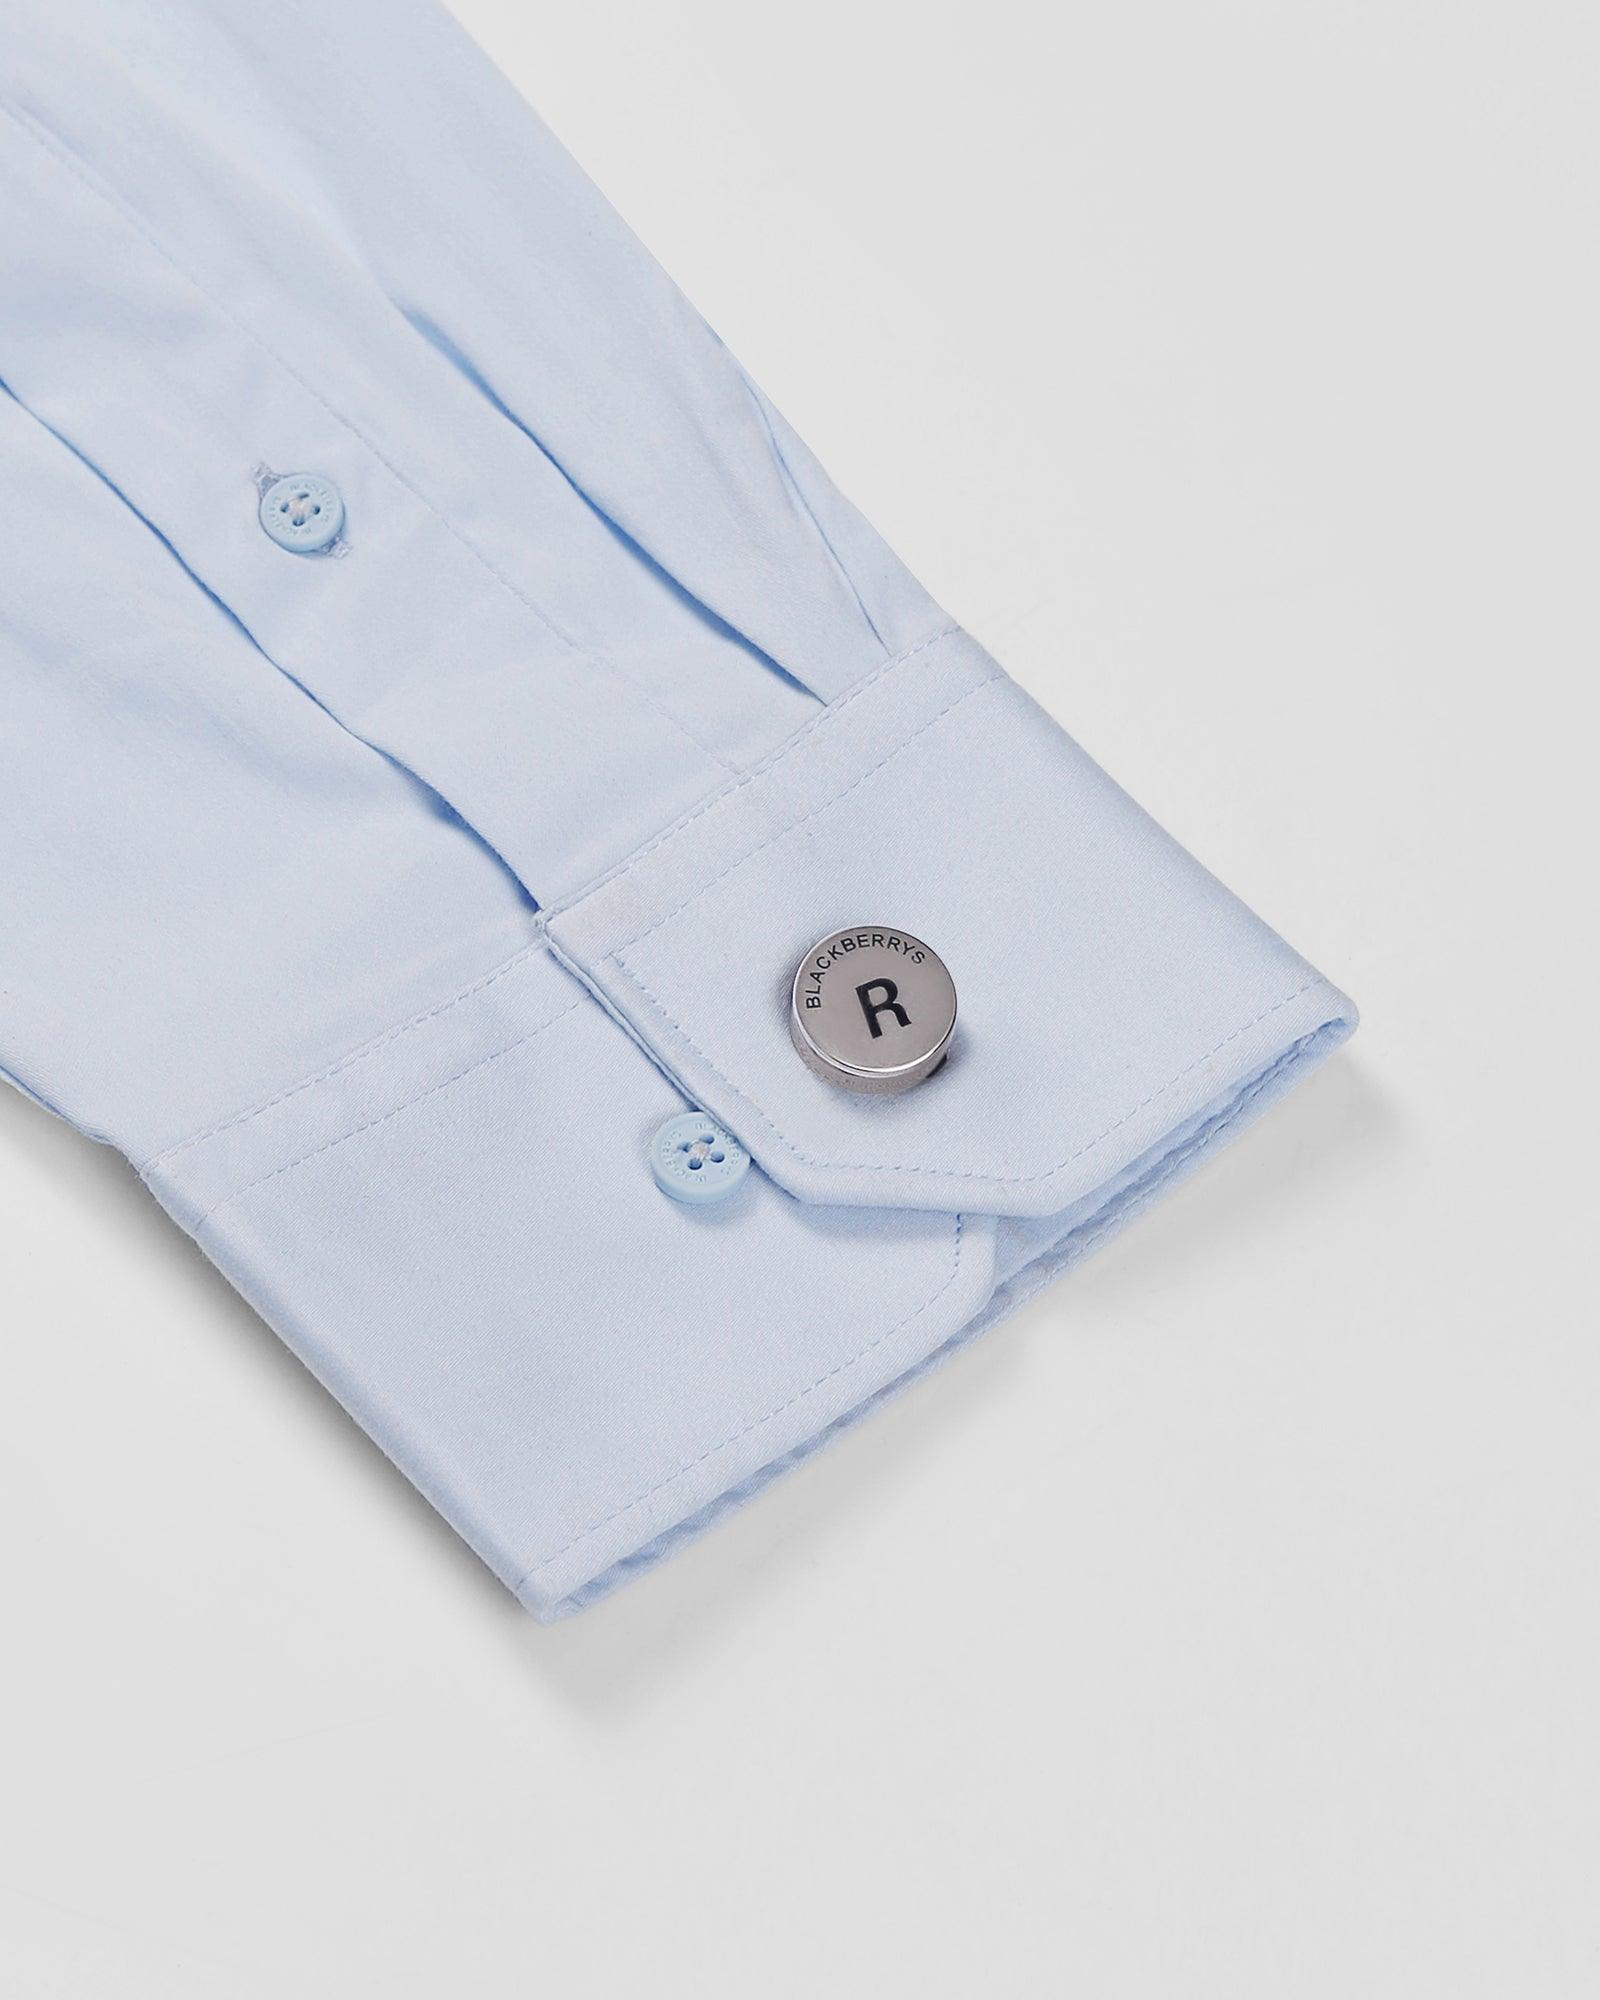 Personalised Shirt Button Cover With Alphabetic Initial-R